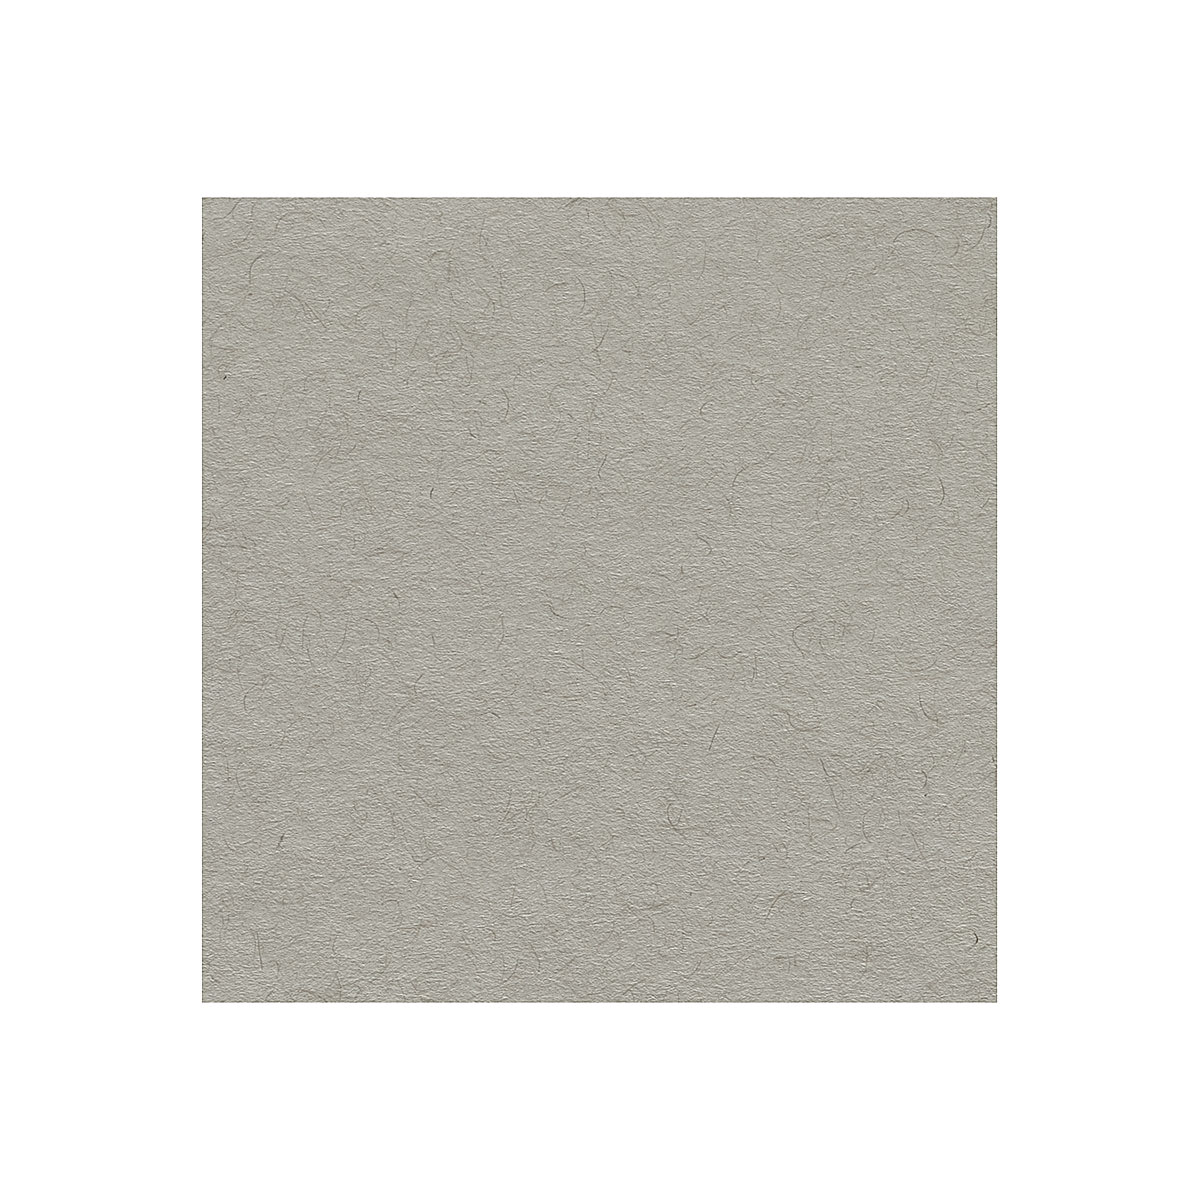 Strathmore® 400 Series Recycled Toned Gray Sketch Paper Pad